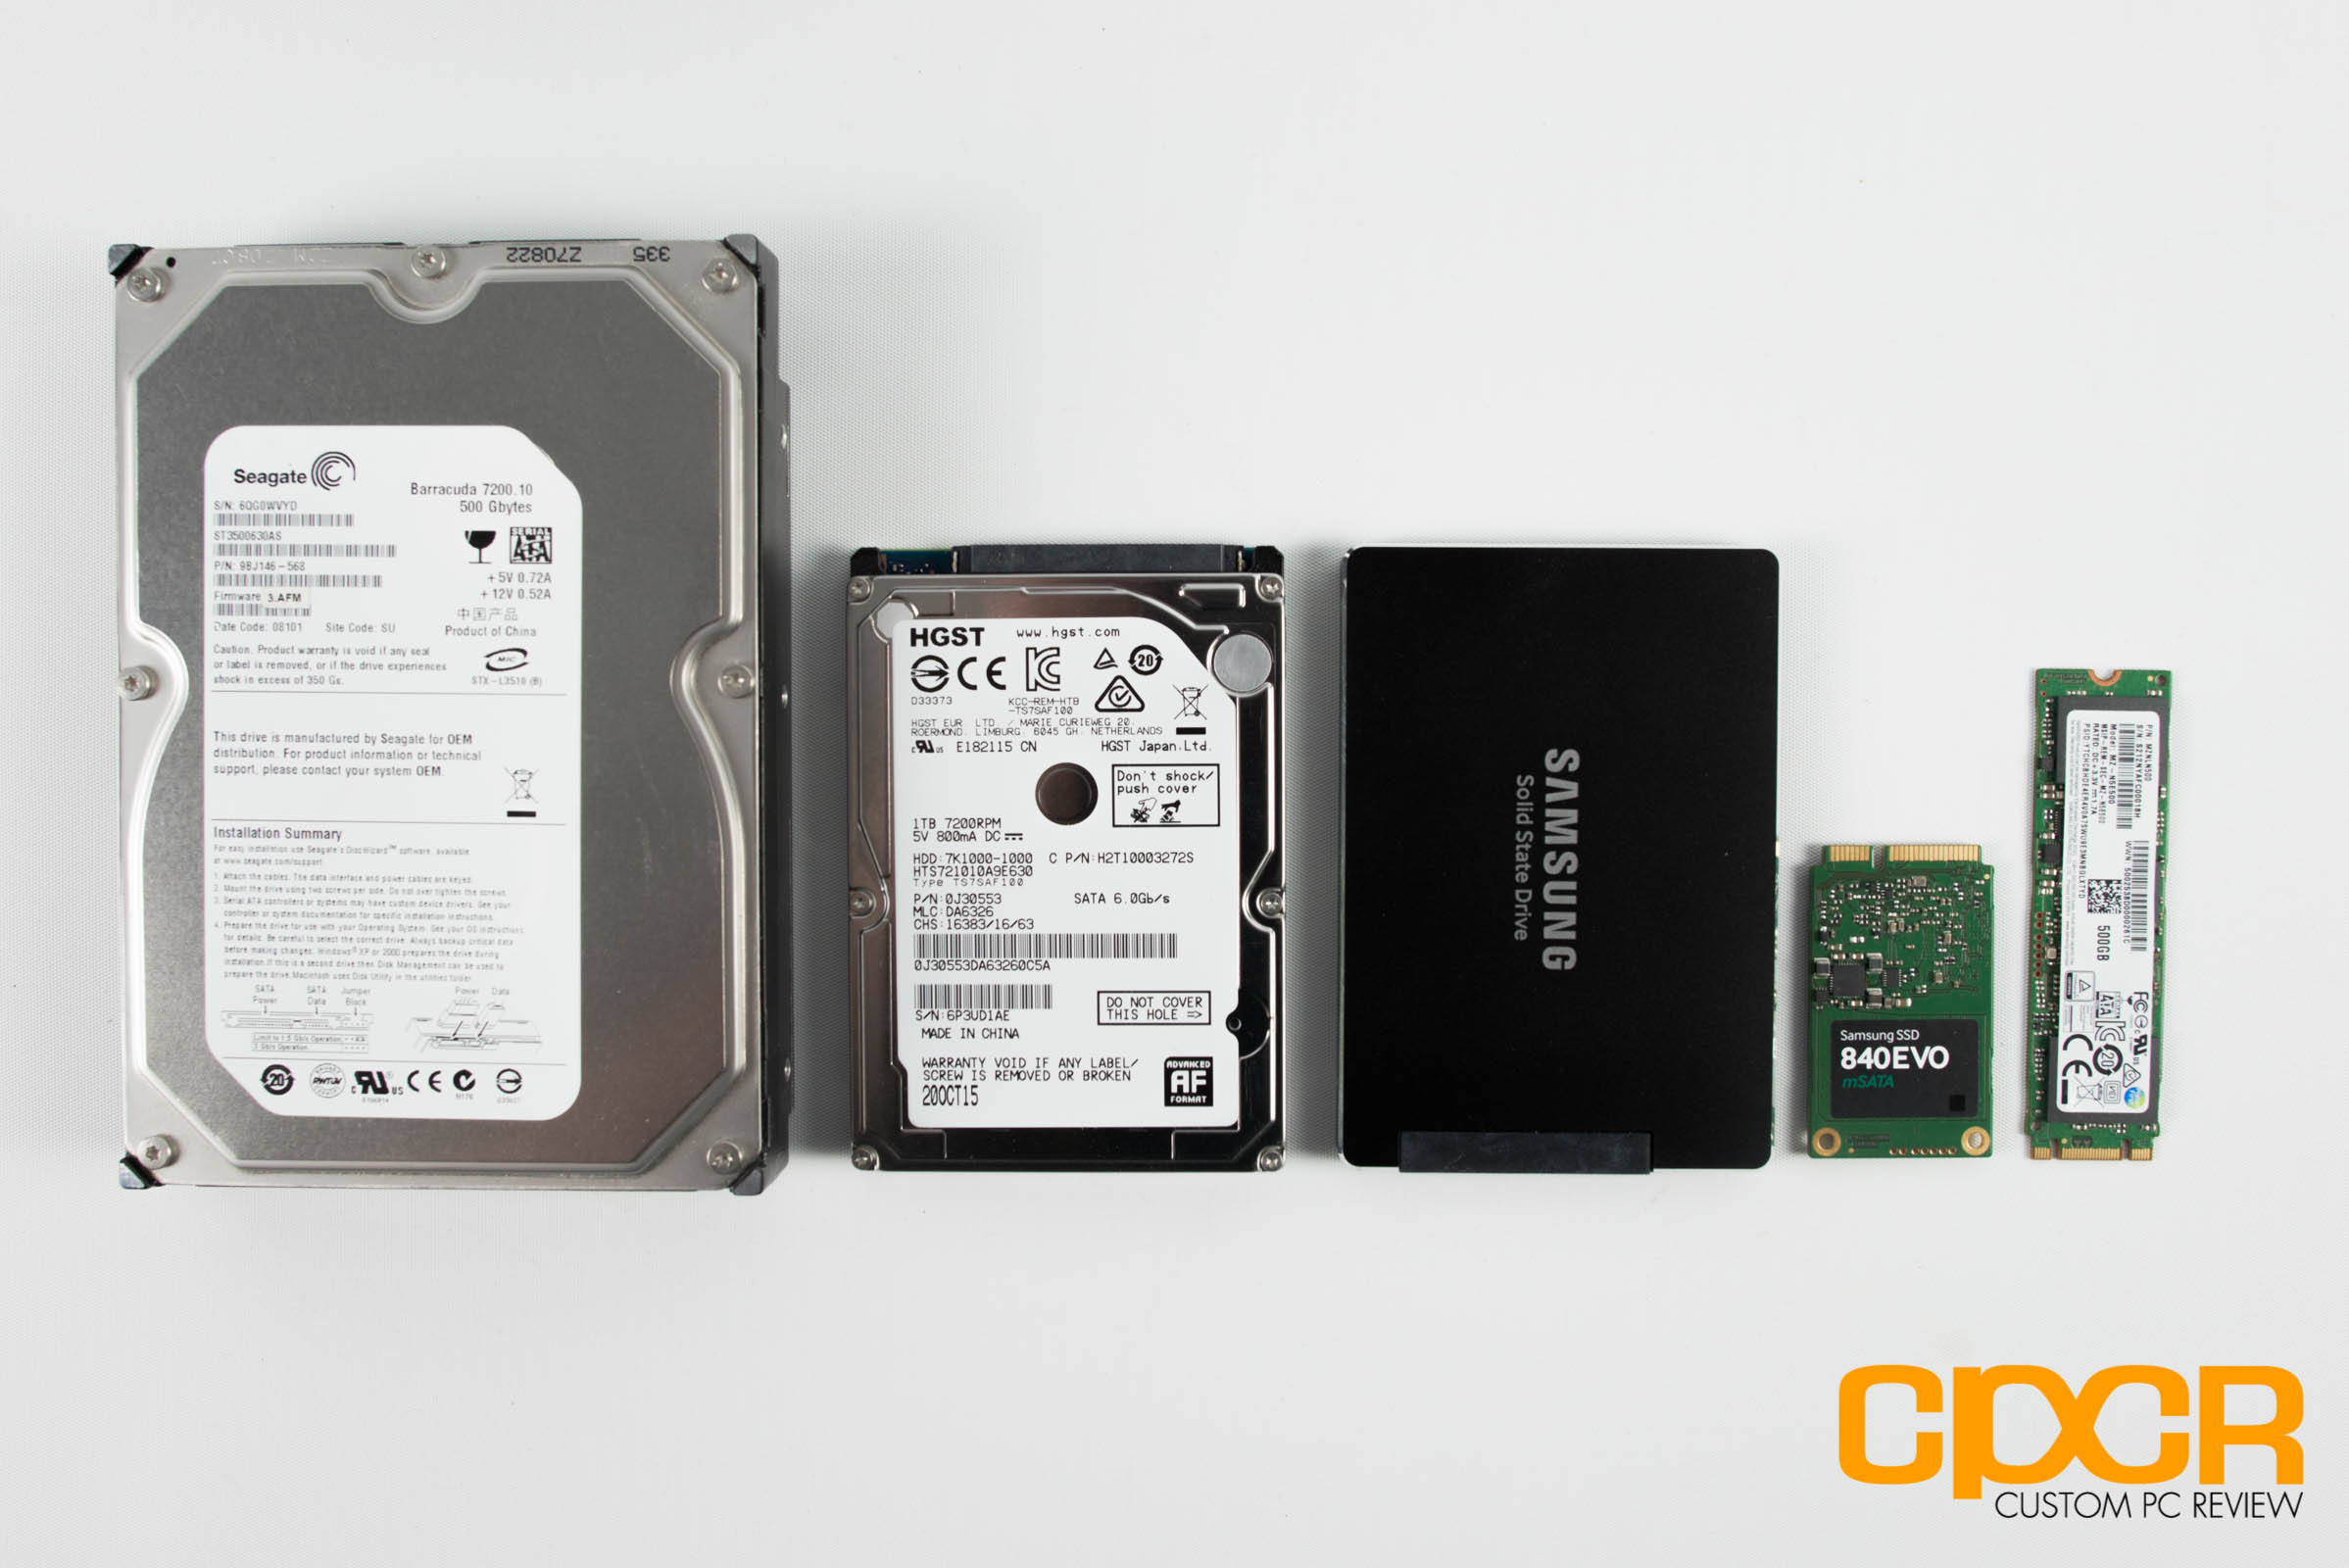 SSD vs HDD Pros and Cons Comparison